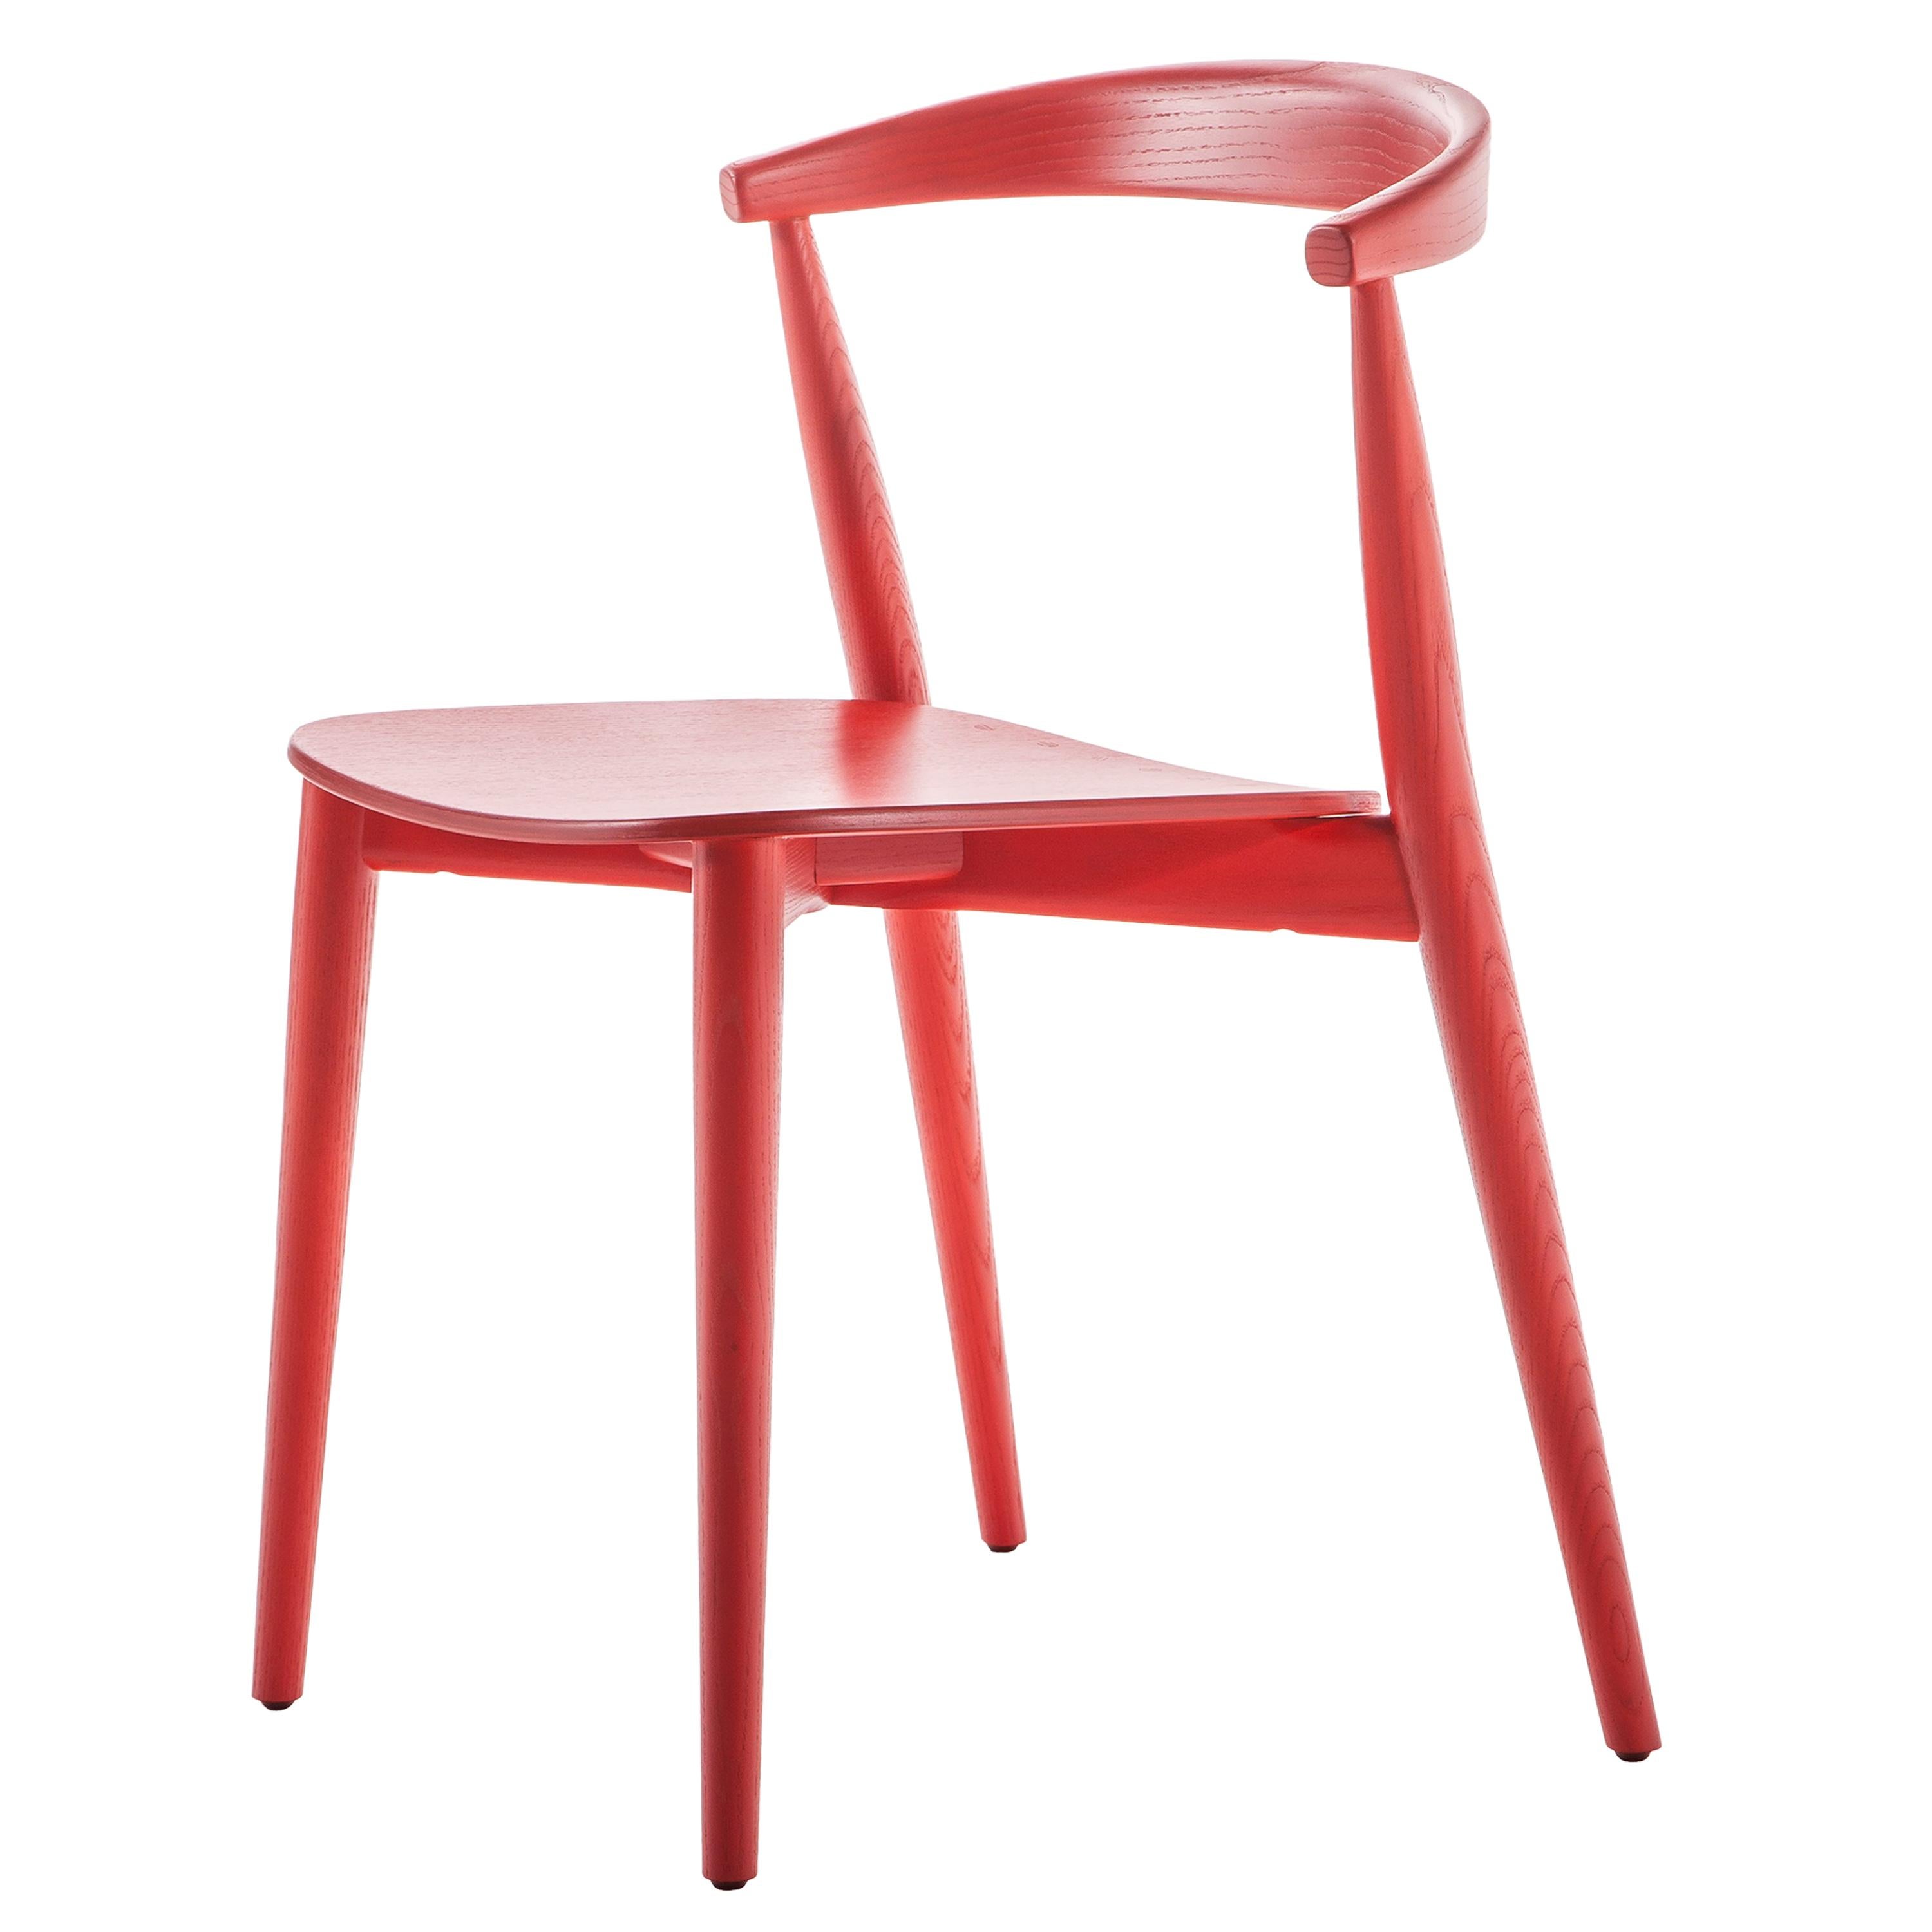 Brogliato Traverso Newood Light Chair in Red Aniline Stained Ash for Cappellini